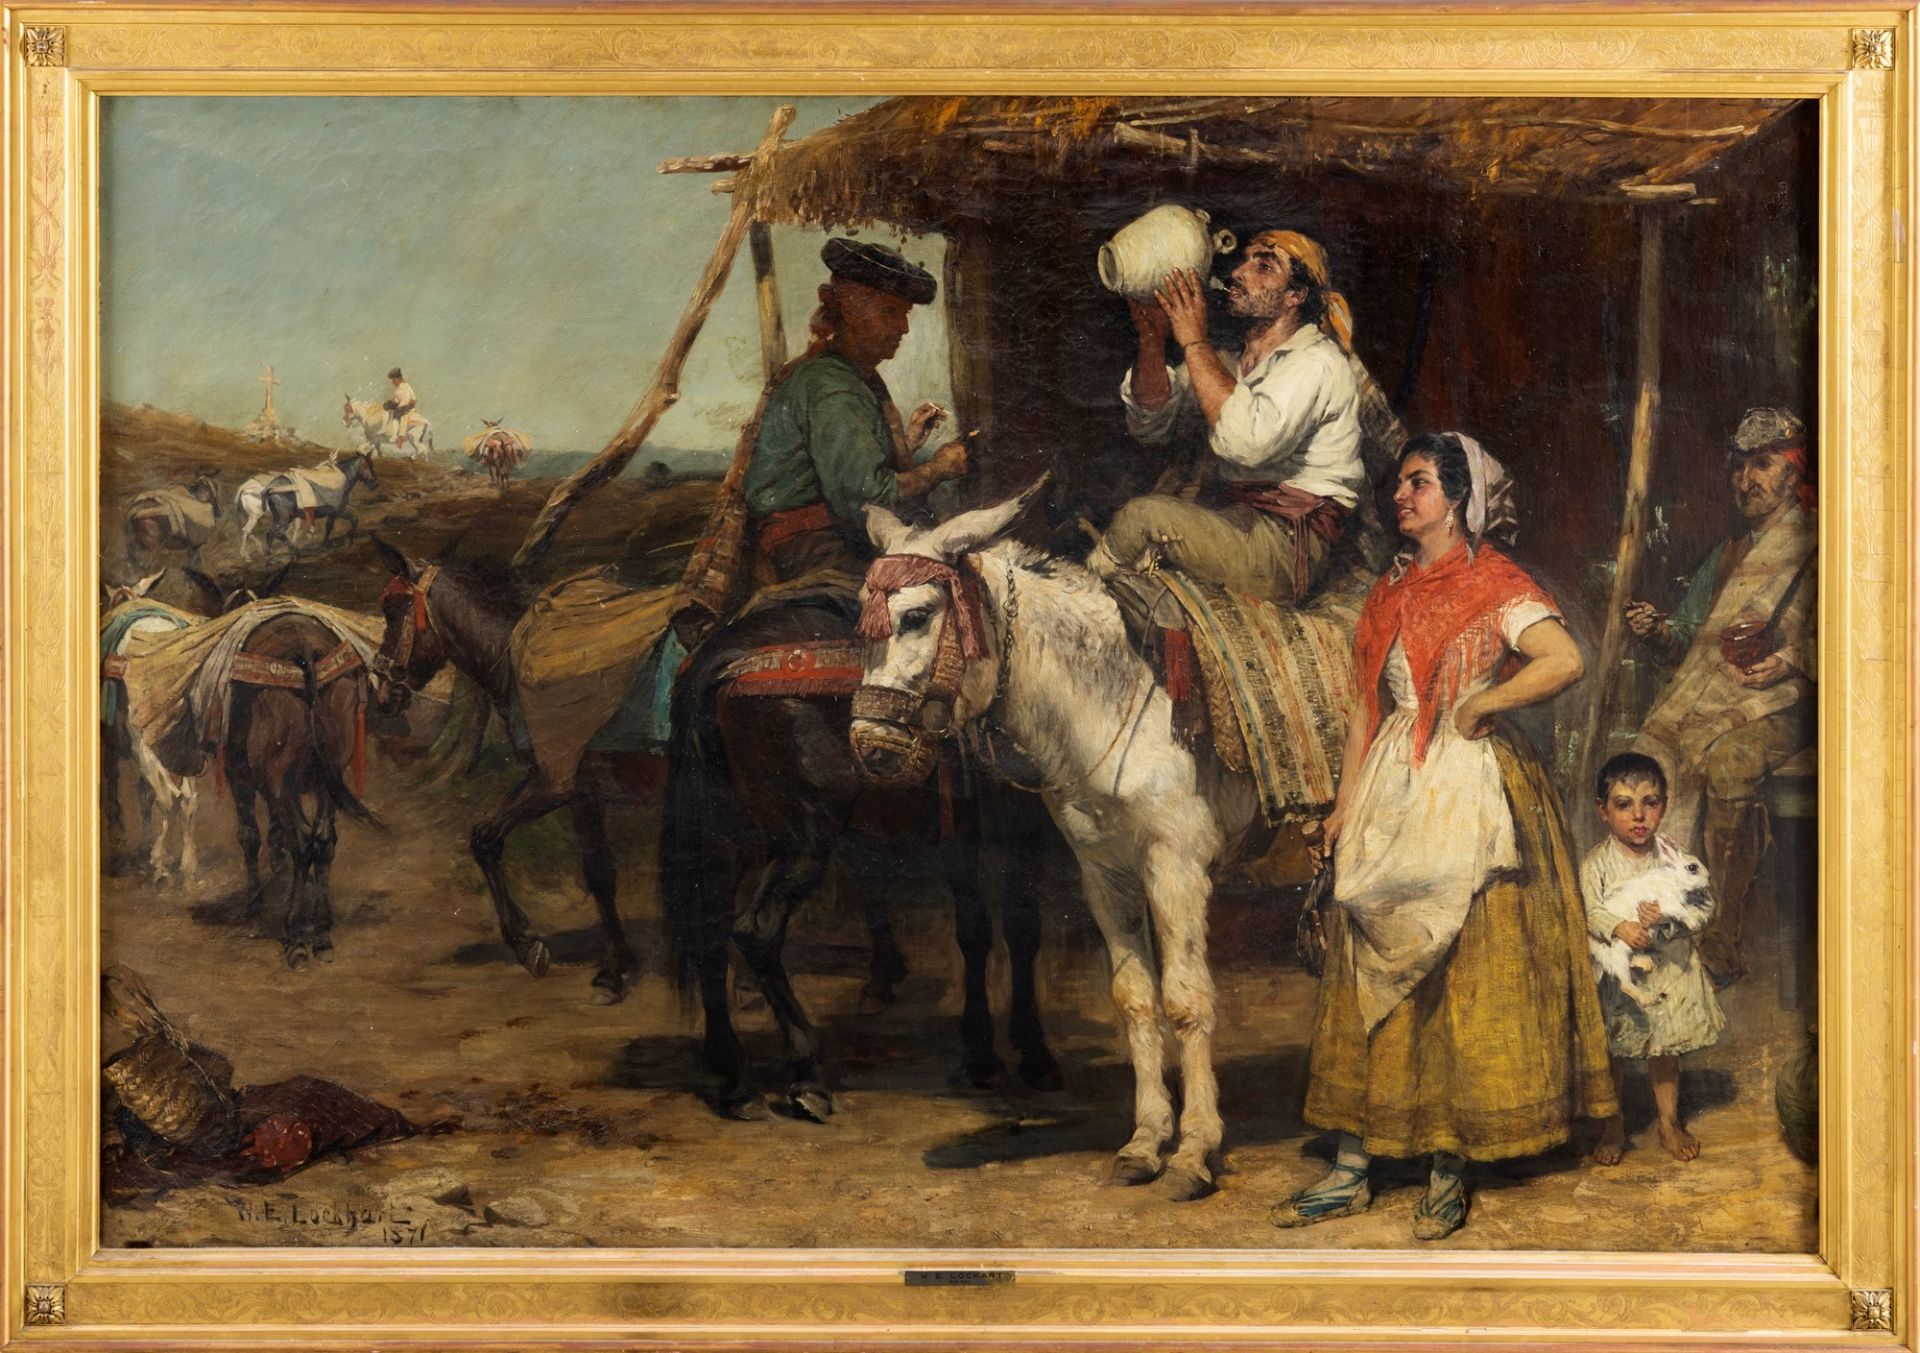 William Ewart Lockhart (Eaglesfield 1846-Londra 1900) - Spain, the stopover for the gypsies, 1871 - Image 2 of 4